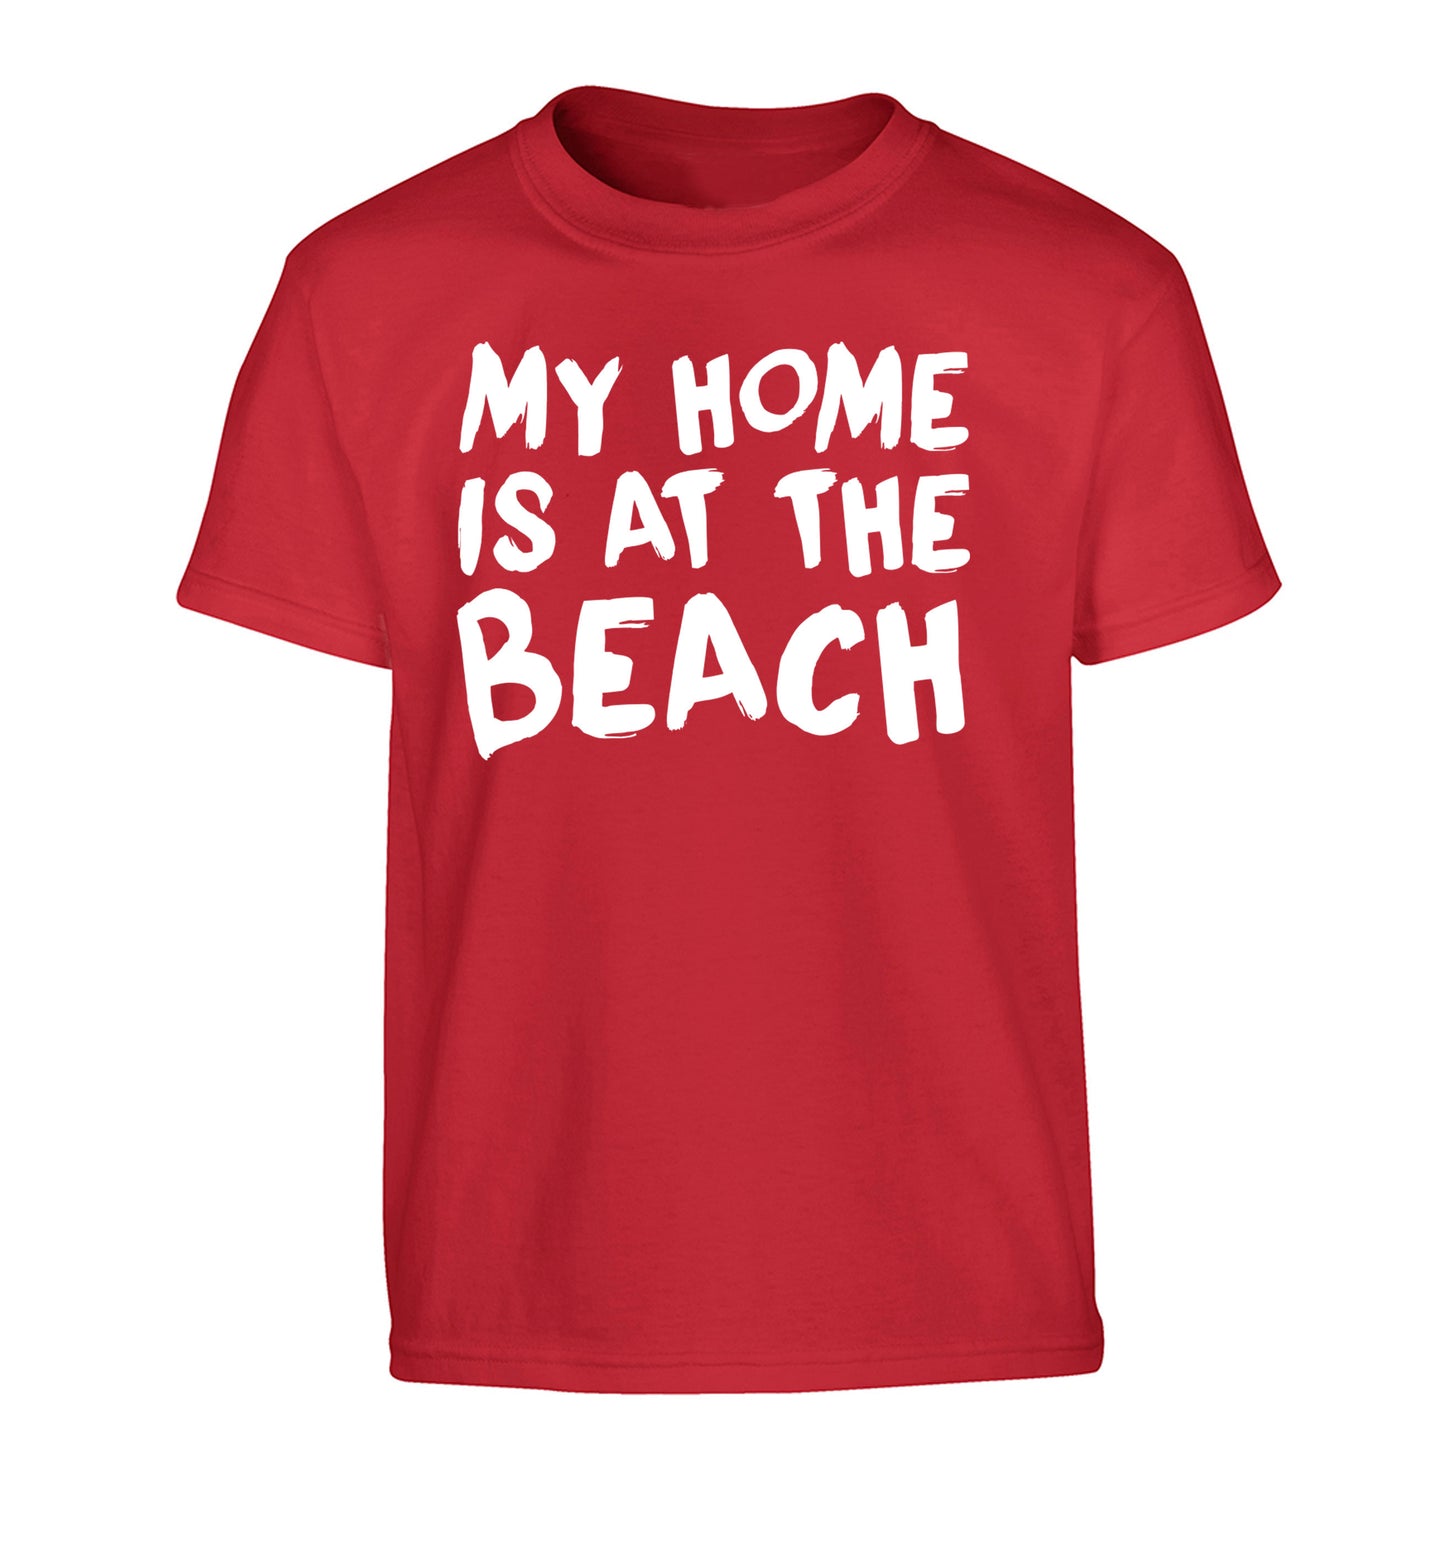 My home is at the beach Children's red Tshirt 12-14 Years